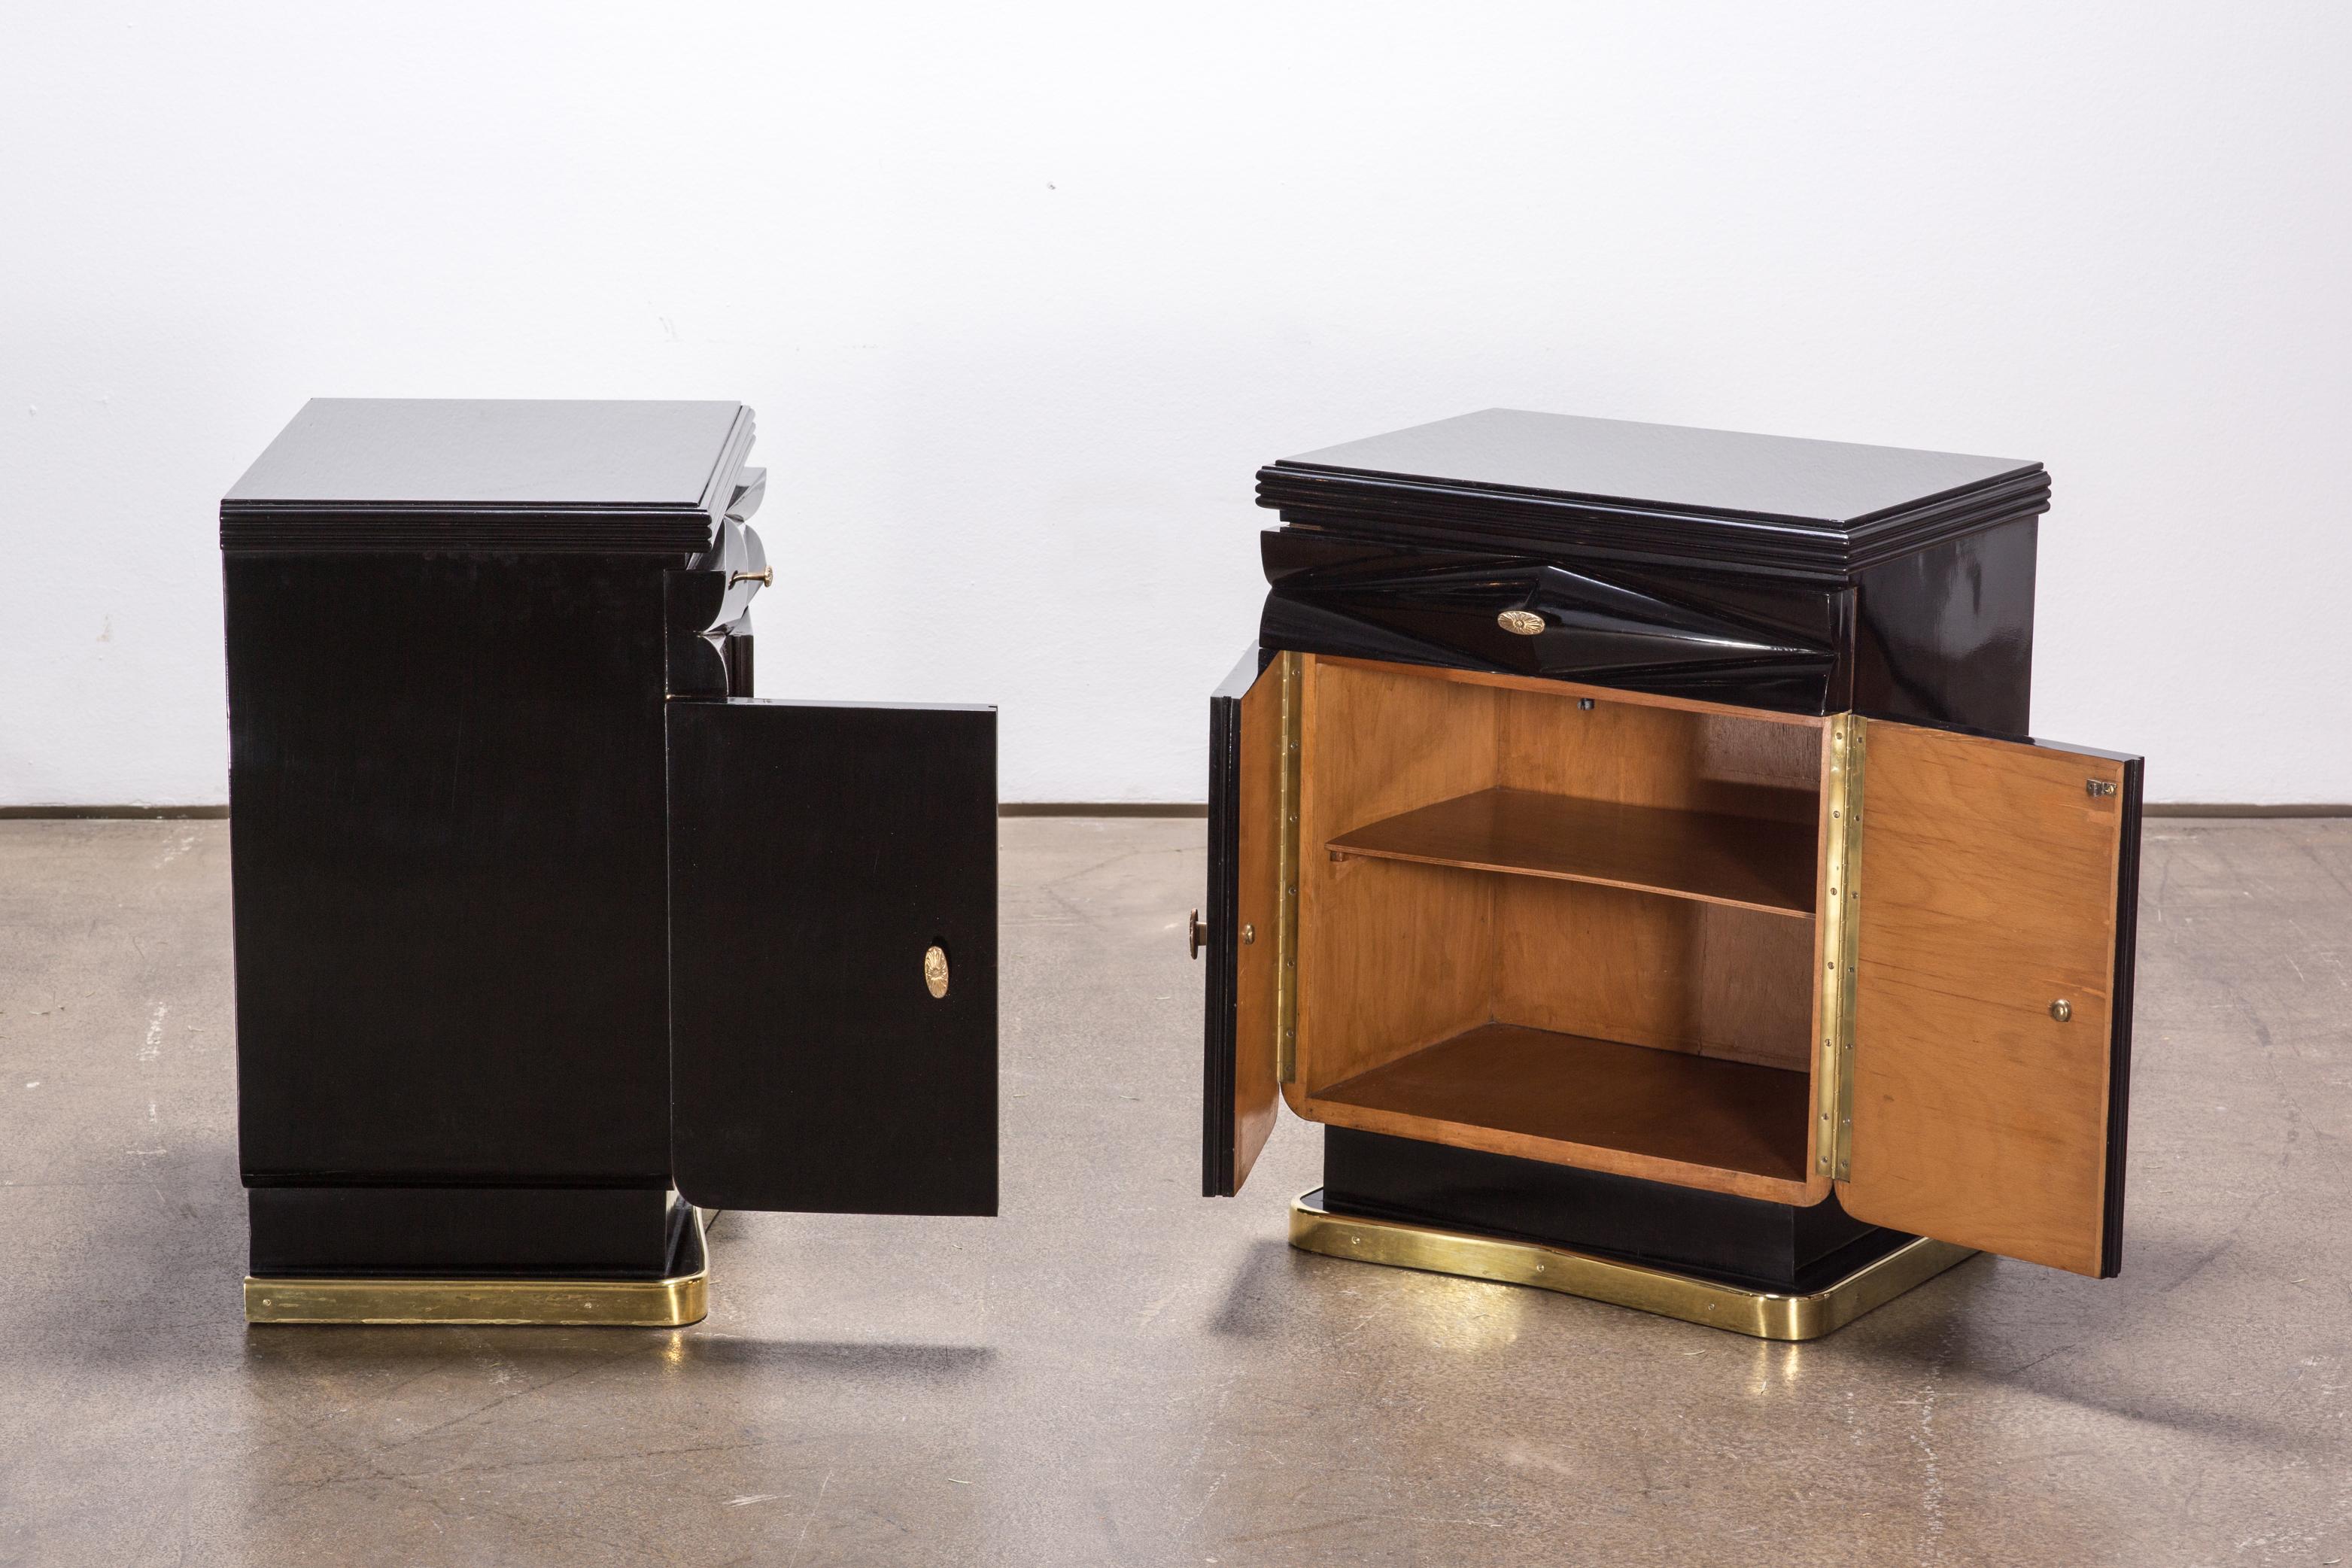 Very decorative pair of Italian Art Deco bedroom nightstands by Osvaldo Borsani.
The antique nightstands are from Italy and are made, circa 1935.
The front of the nightstand is made of ebonized and polished walnut and decorated with original